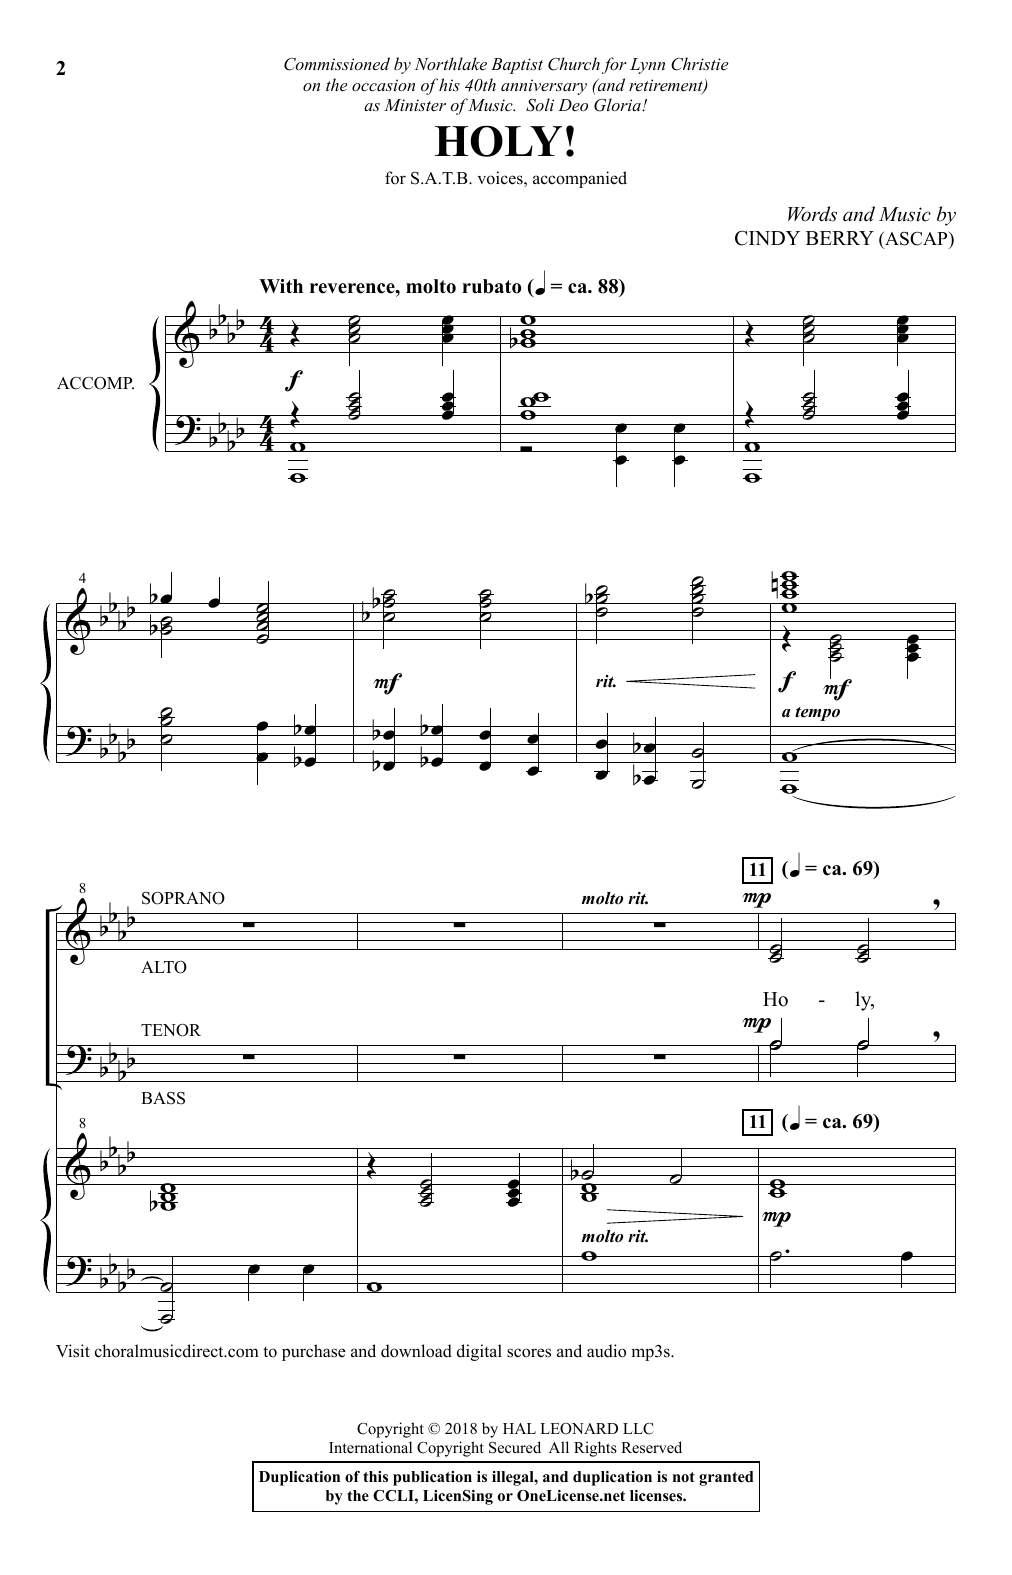 Download Cindy Berry Holy! Sheet Music